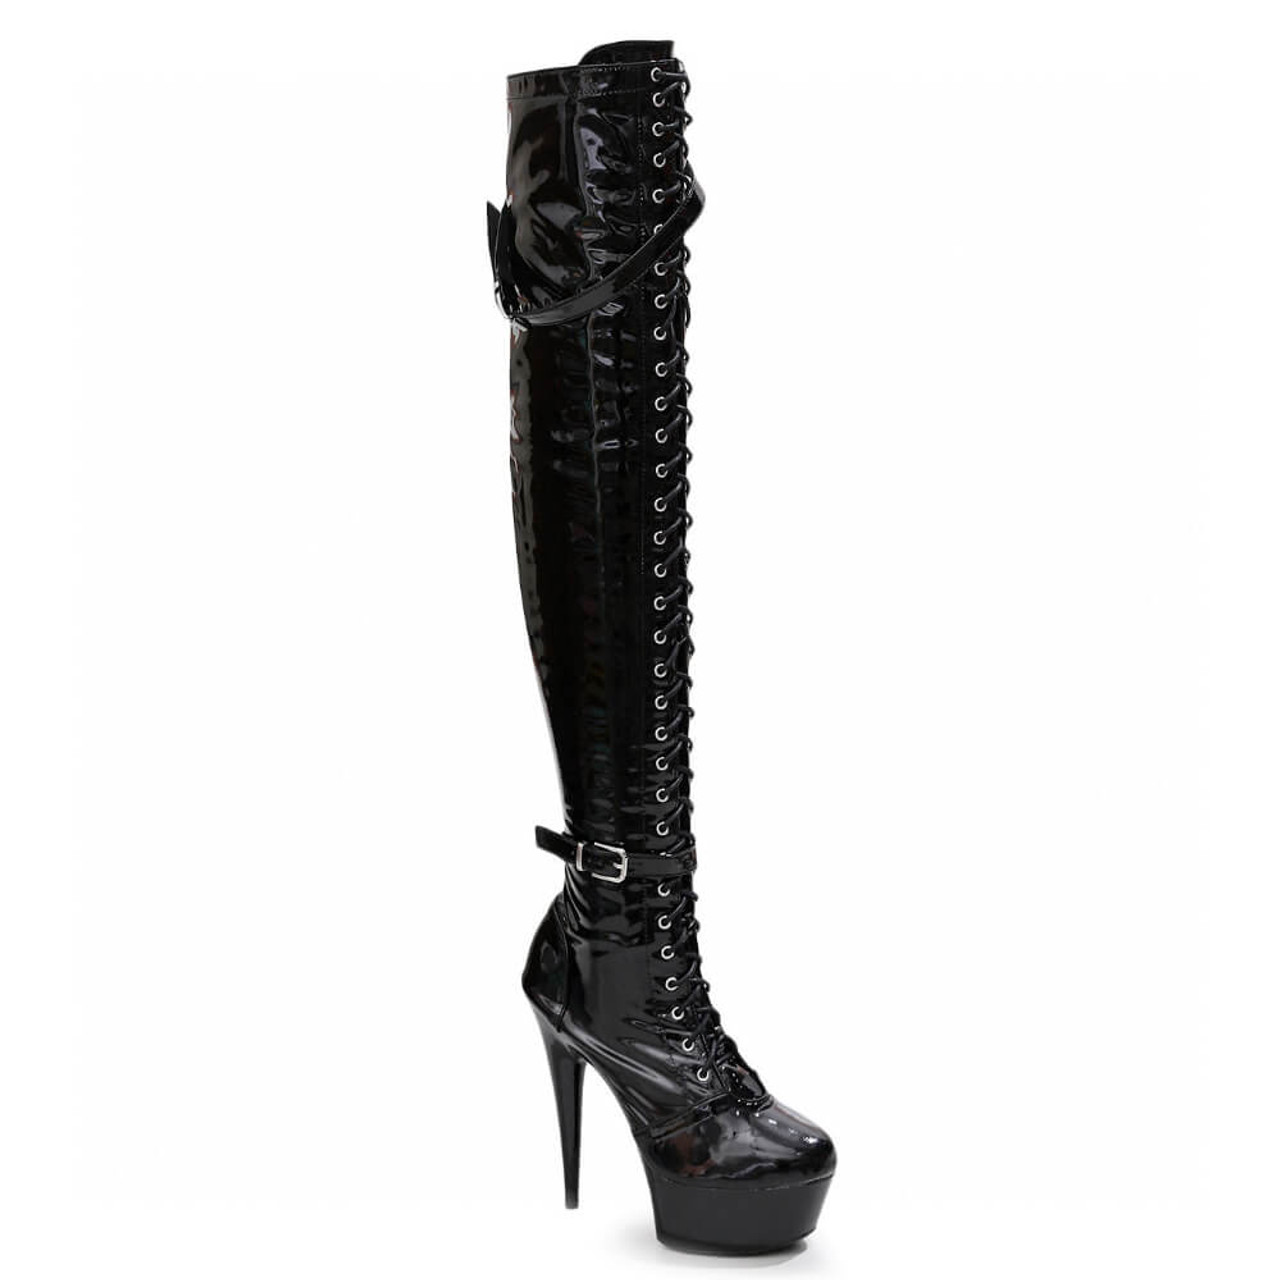 Domina 6 Inch High Heel Governess Shoe - Lace Up Front Fetish Shoe